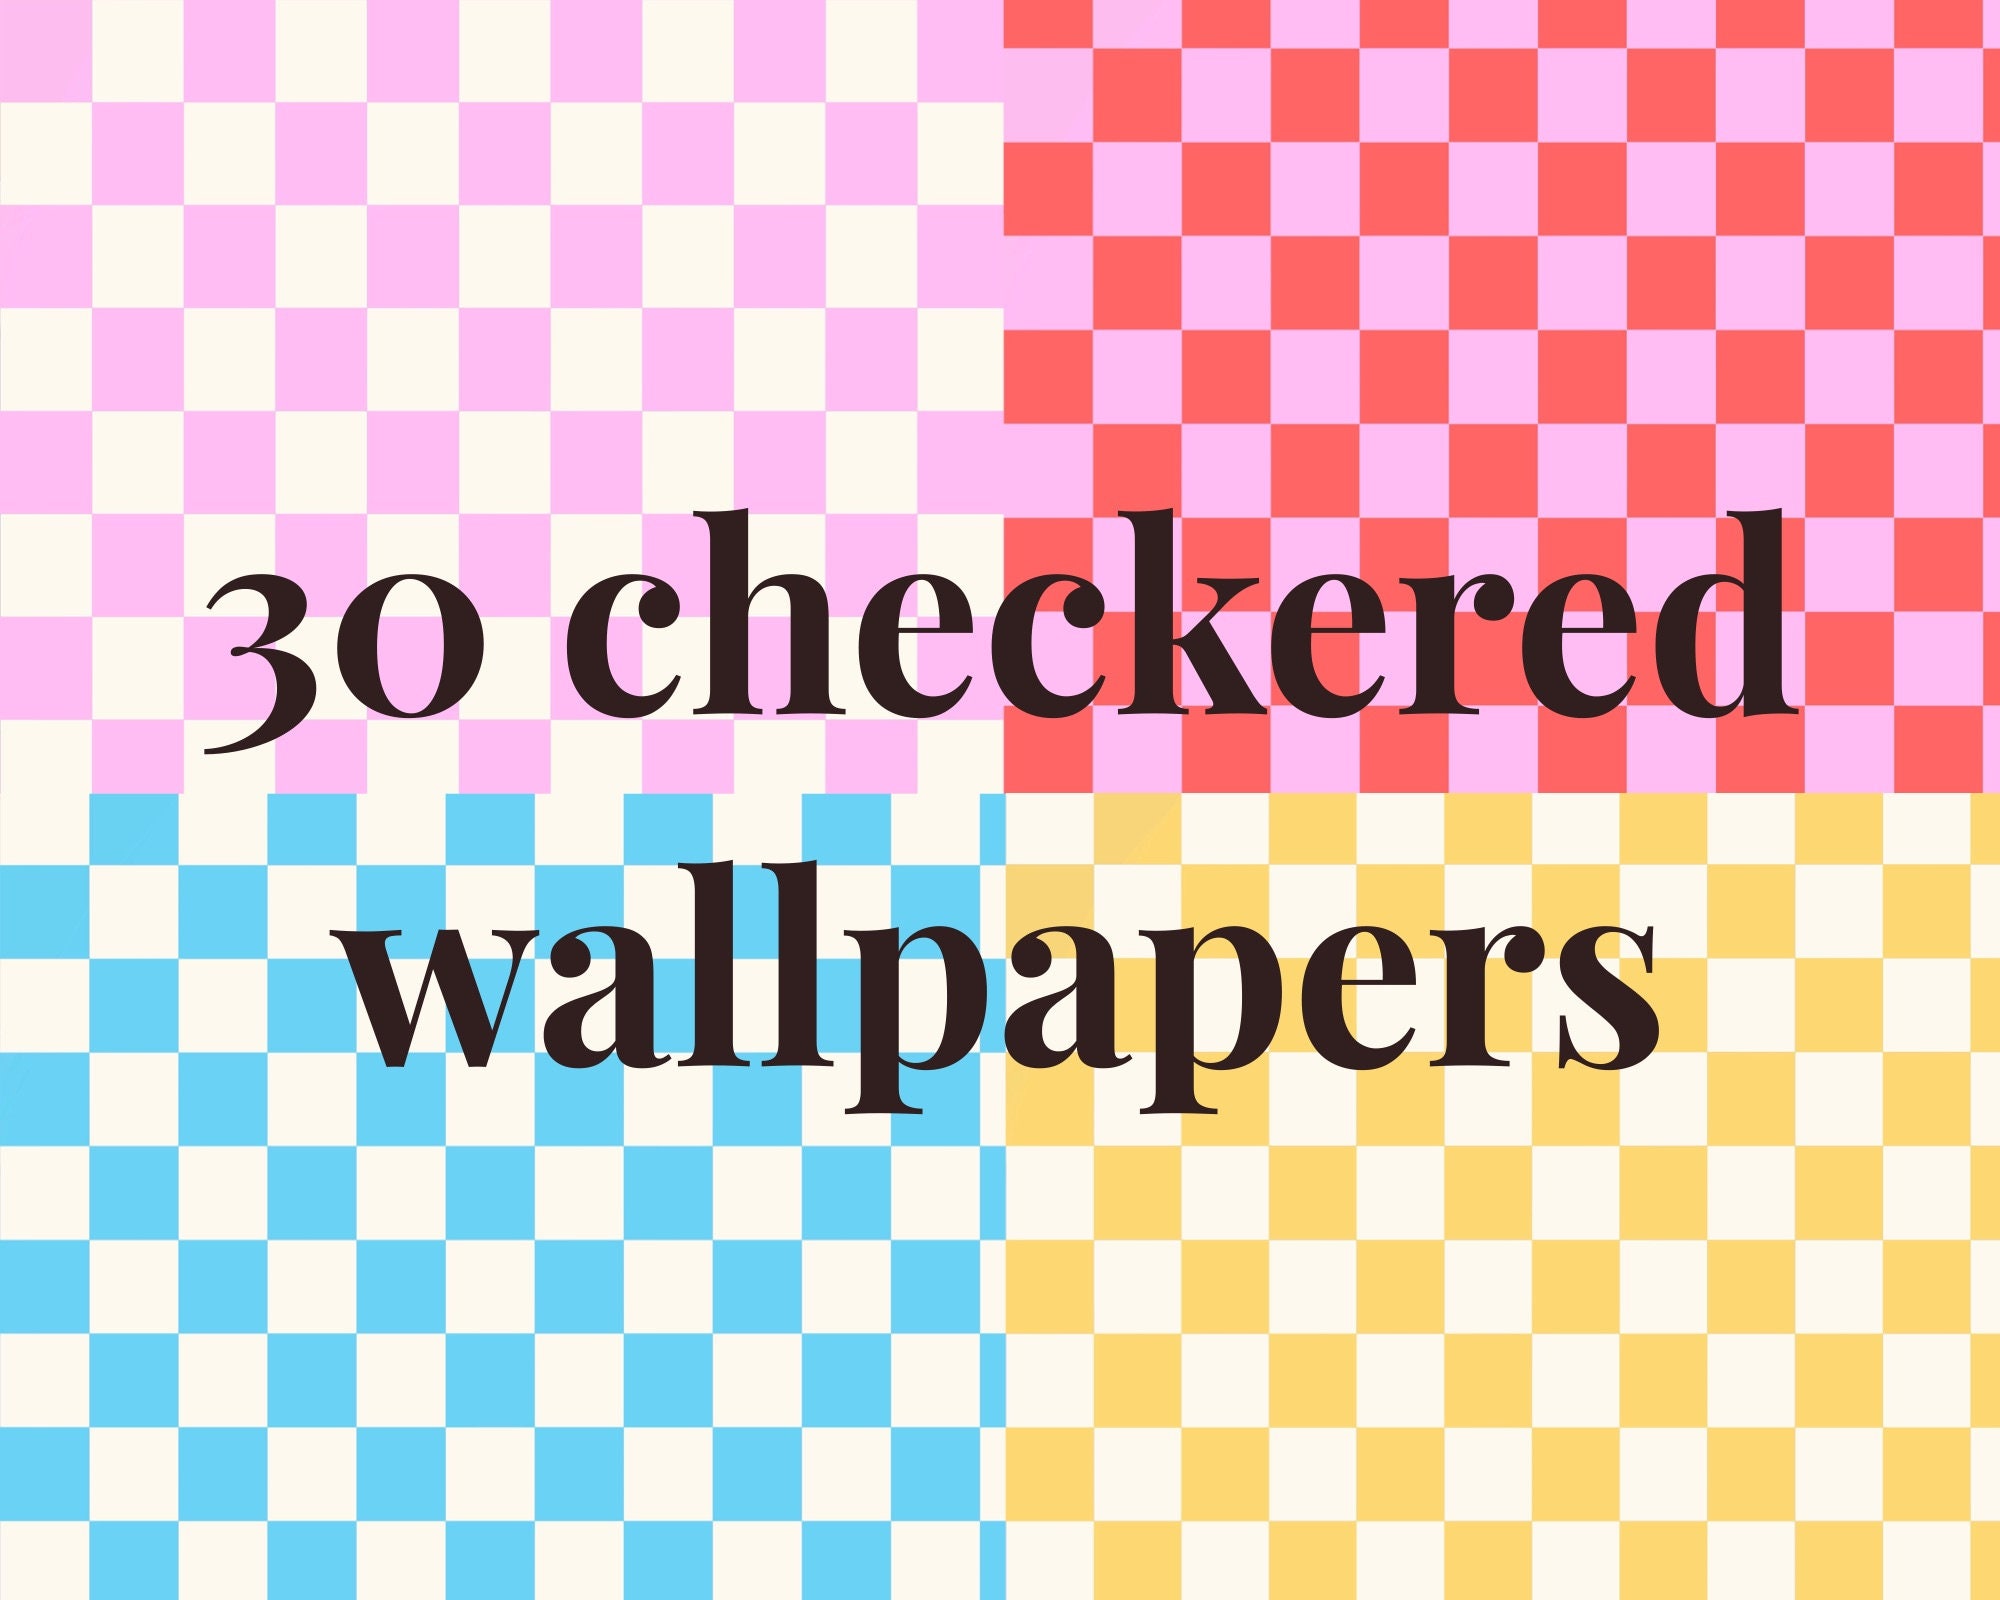 Aesthetic Purple and Black Distorted Checkerboard Checkers Wallpaper  Illustration Perfect for Backdrop Wallpaper Background Stock Vector   Illustration of checkerboard gingham 257967715